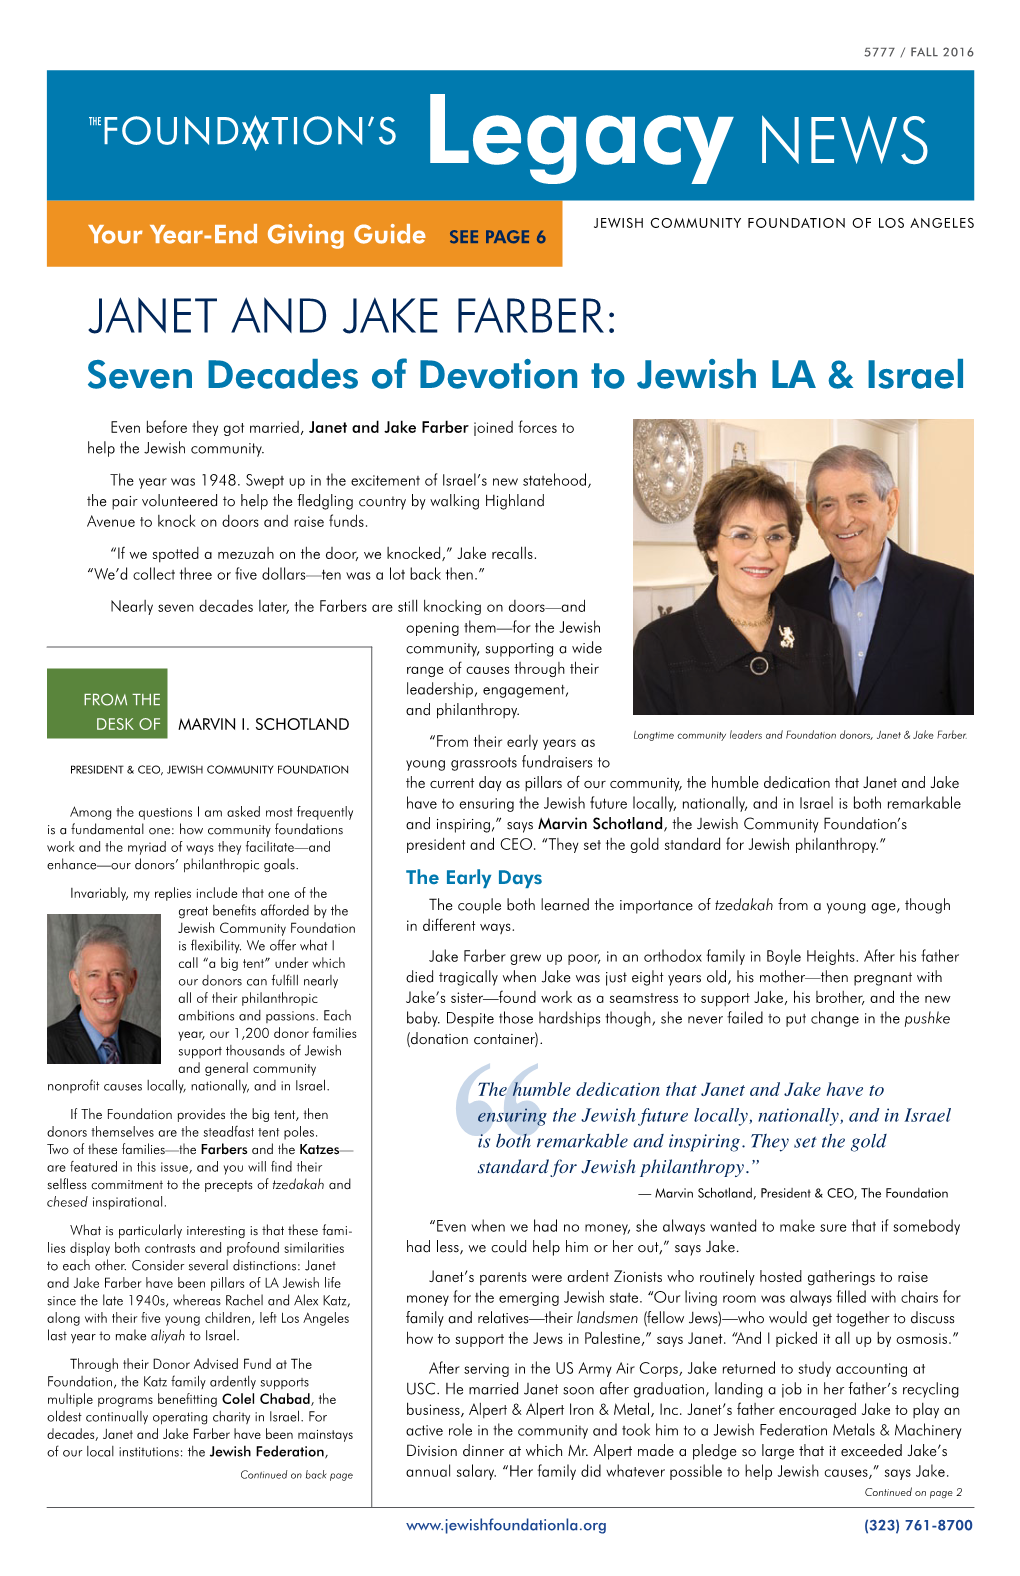 Janet and Jake Farber: Seven Decades of Devotion to Jewish LA & Israel